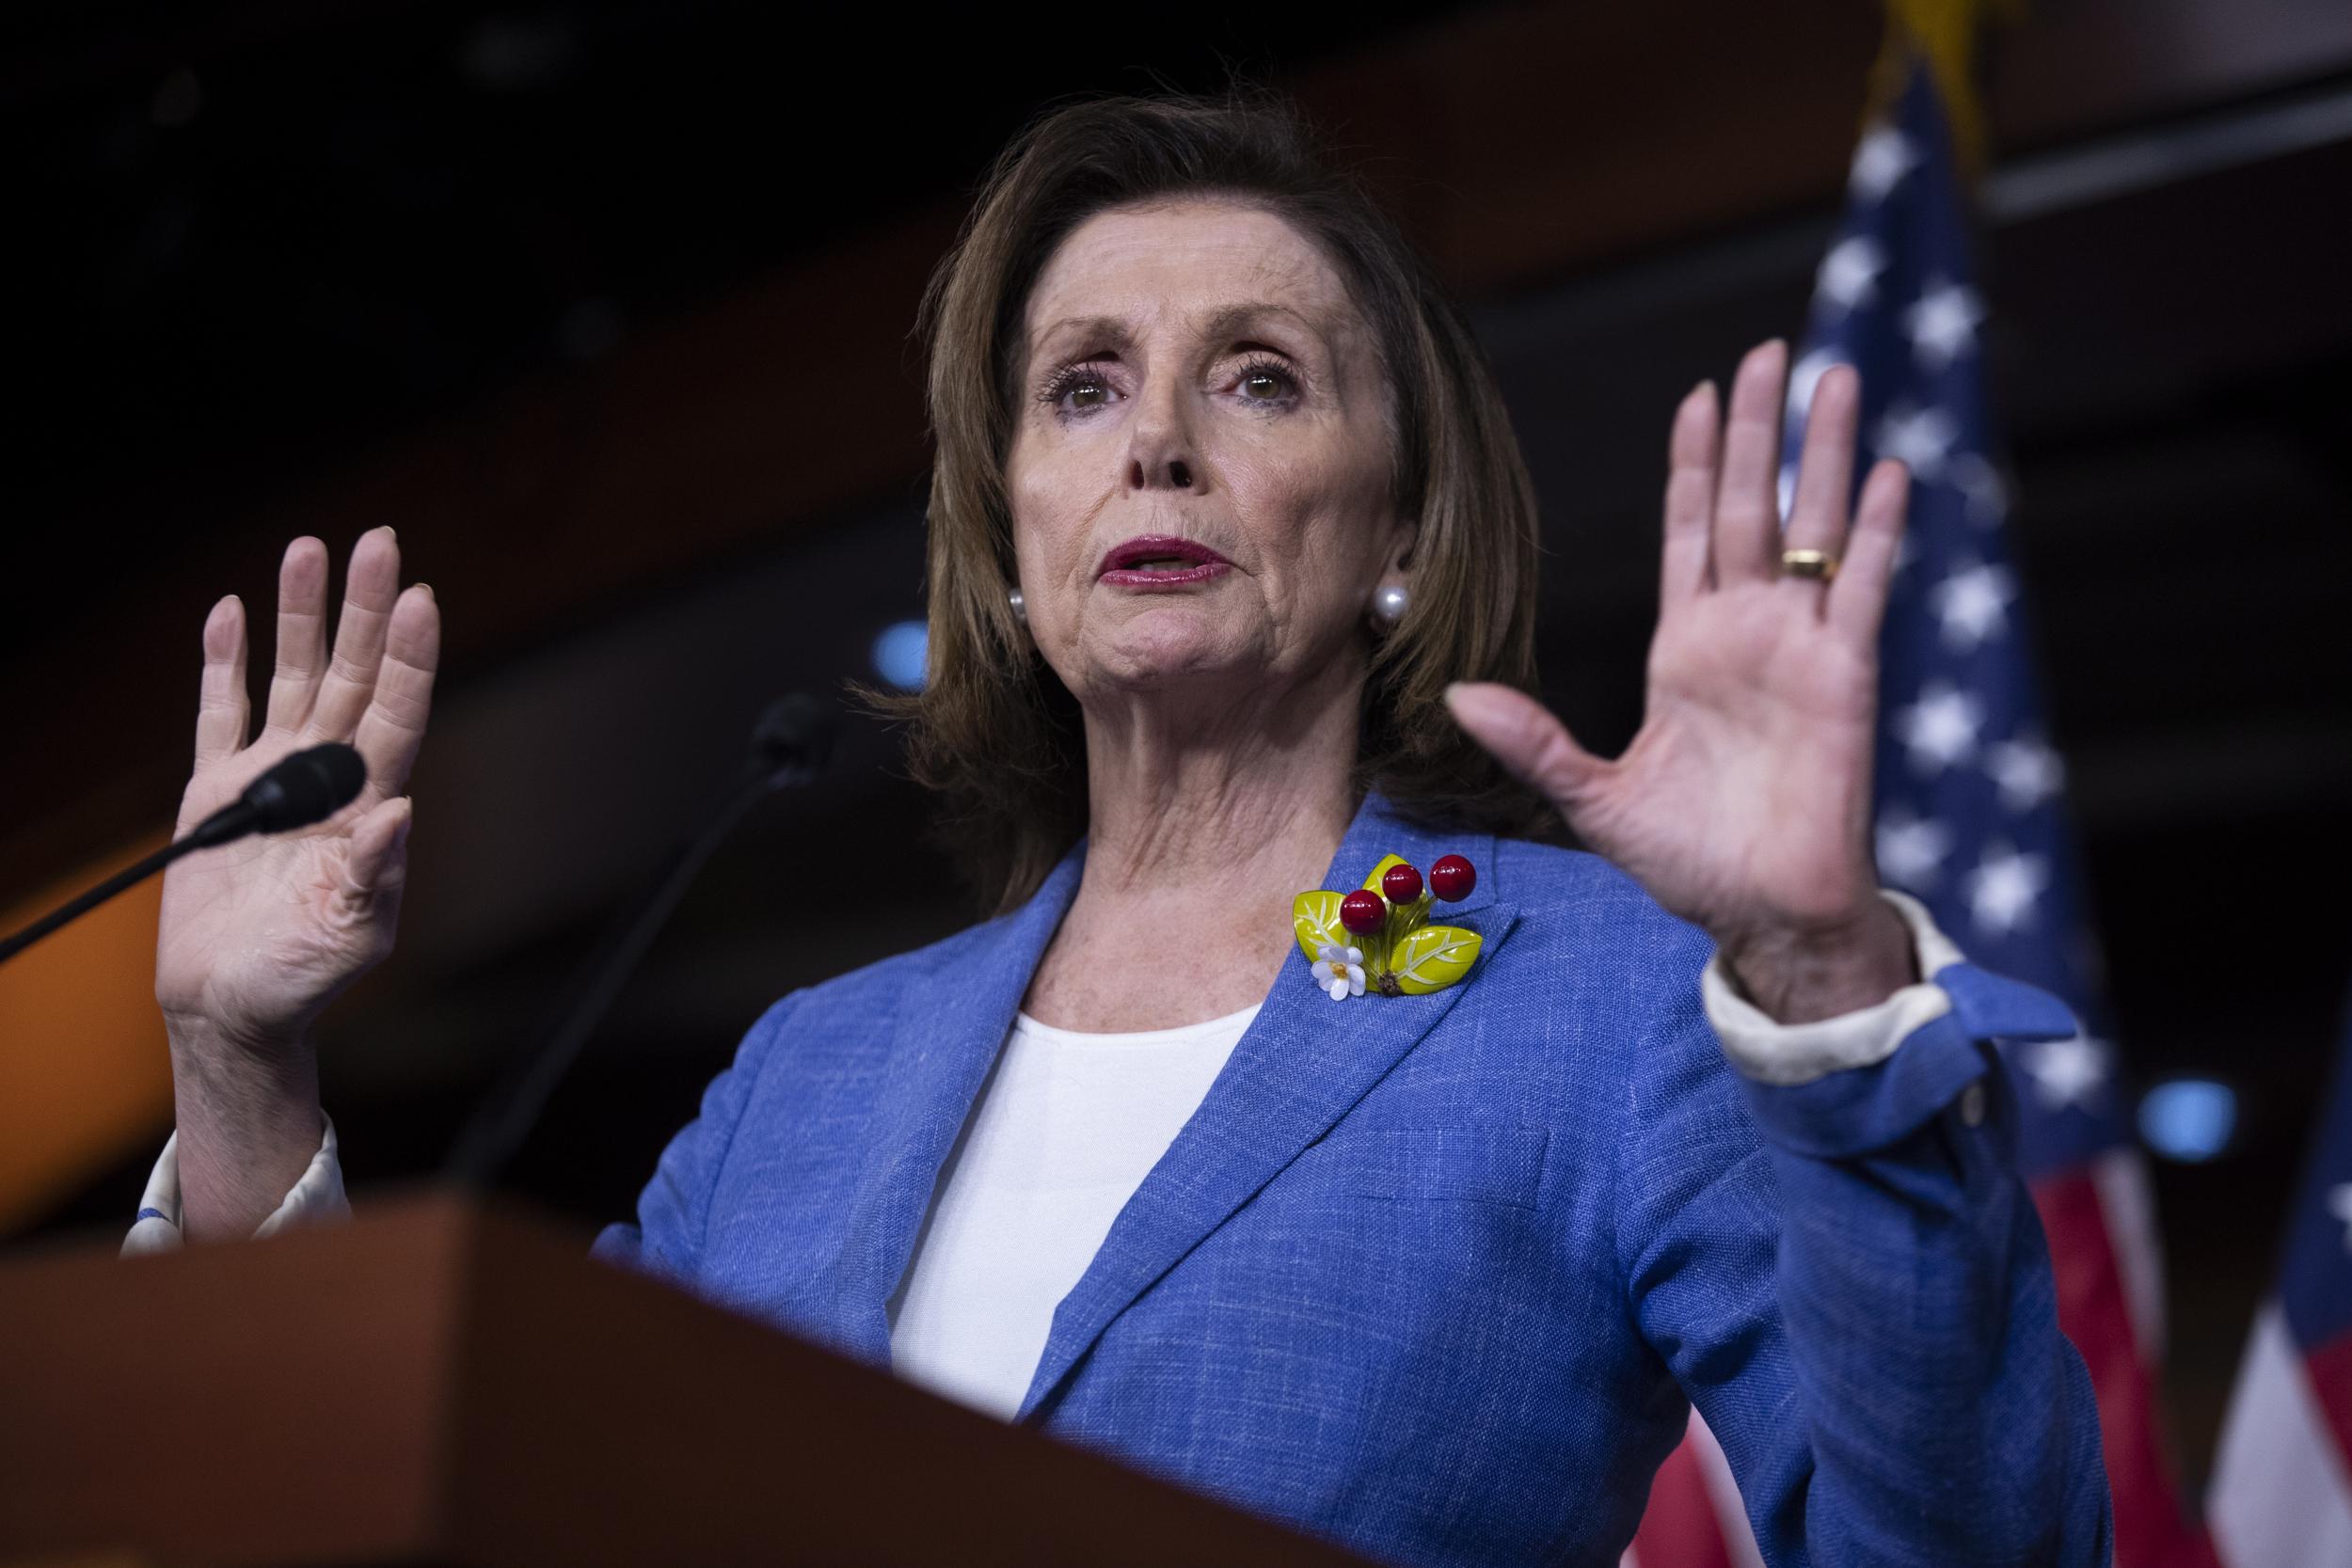 Nancy Pelosi says Democrats demanding impeachment 'only gives me leverage' as over 100 House members call for removal of Trump